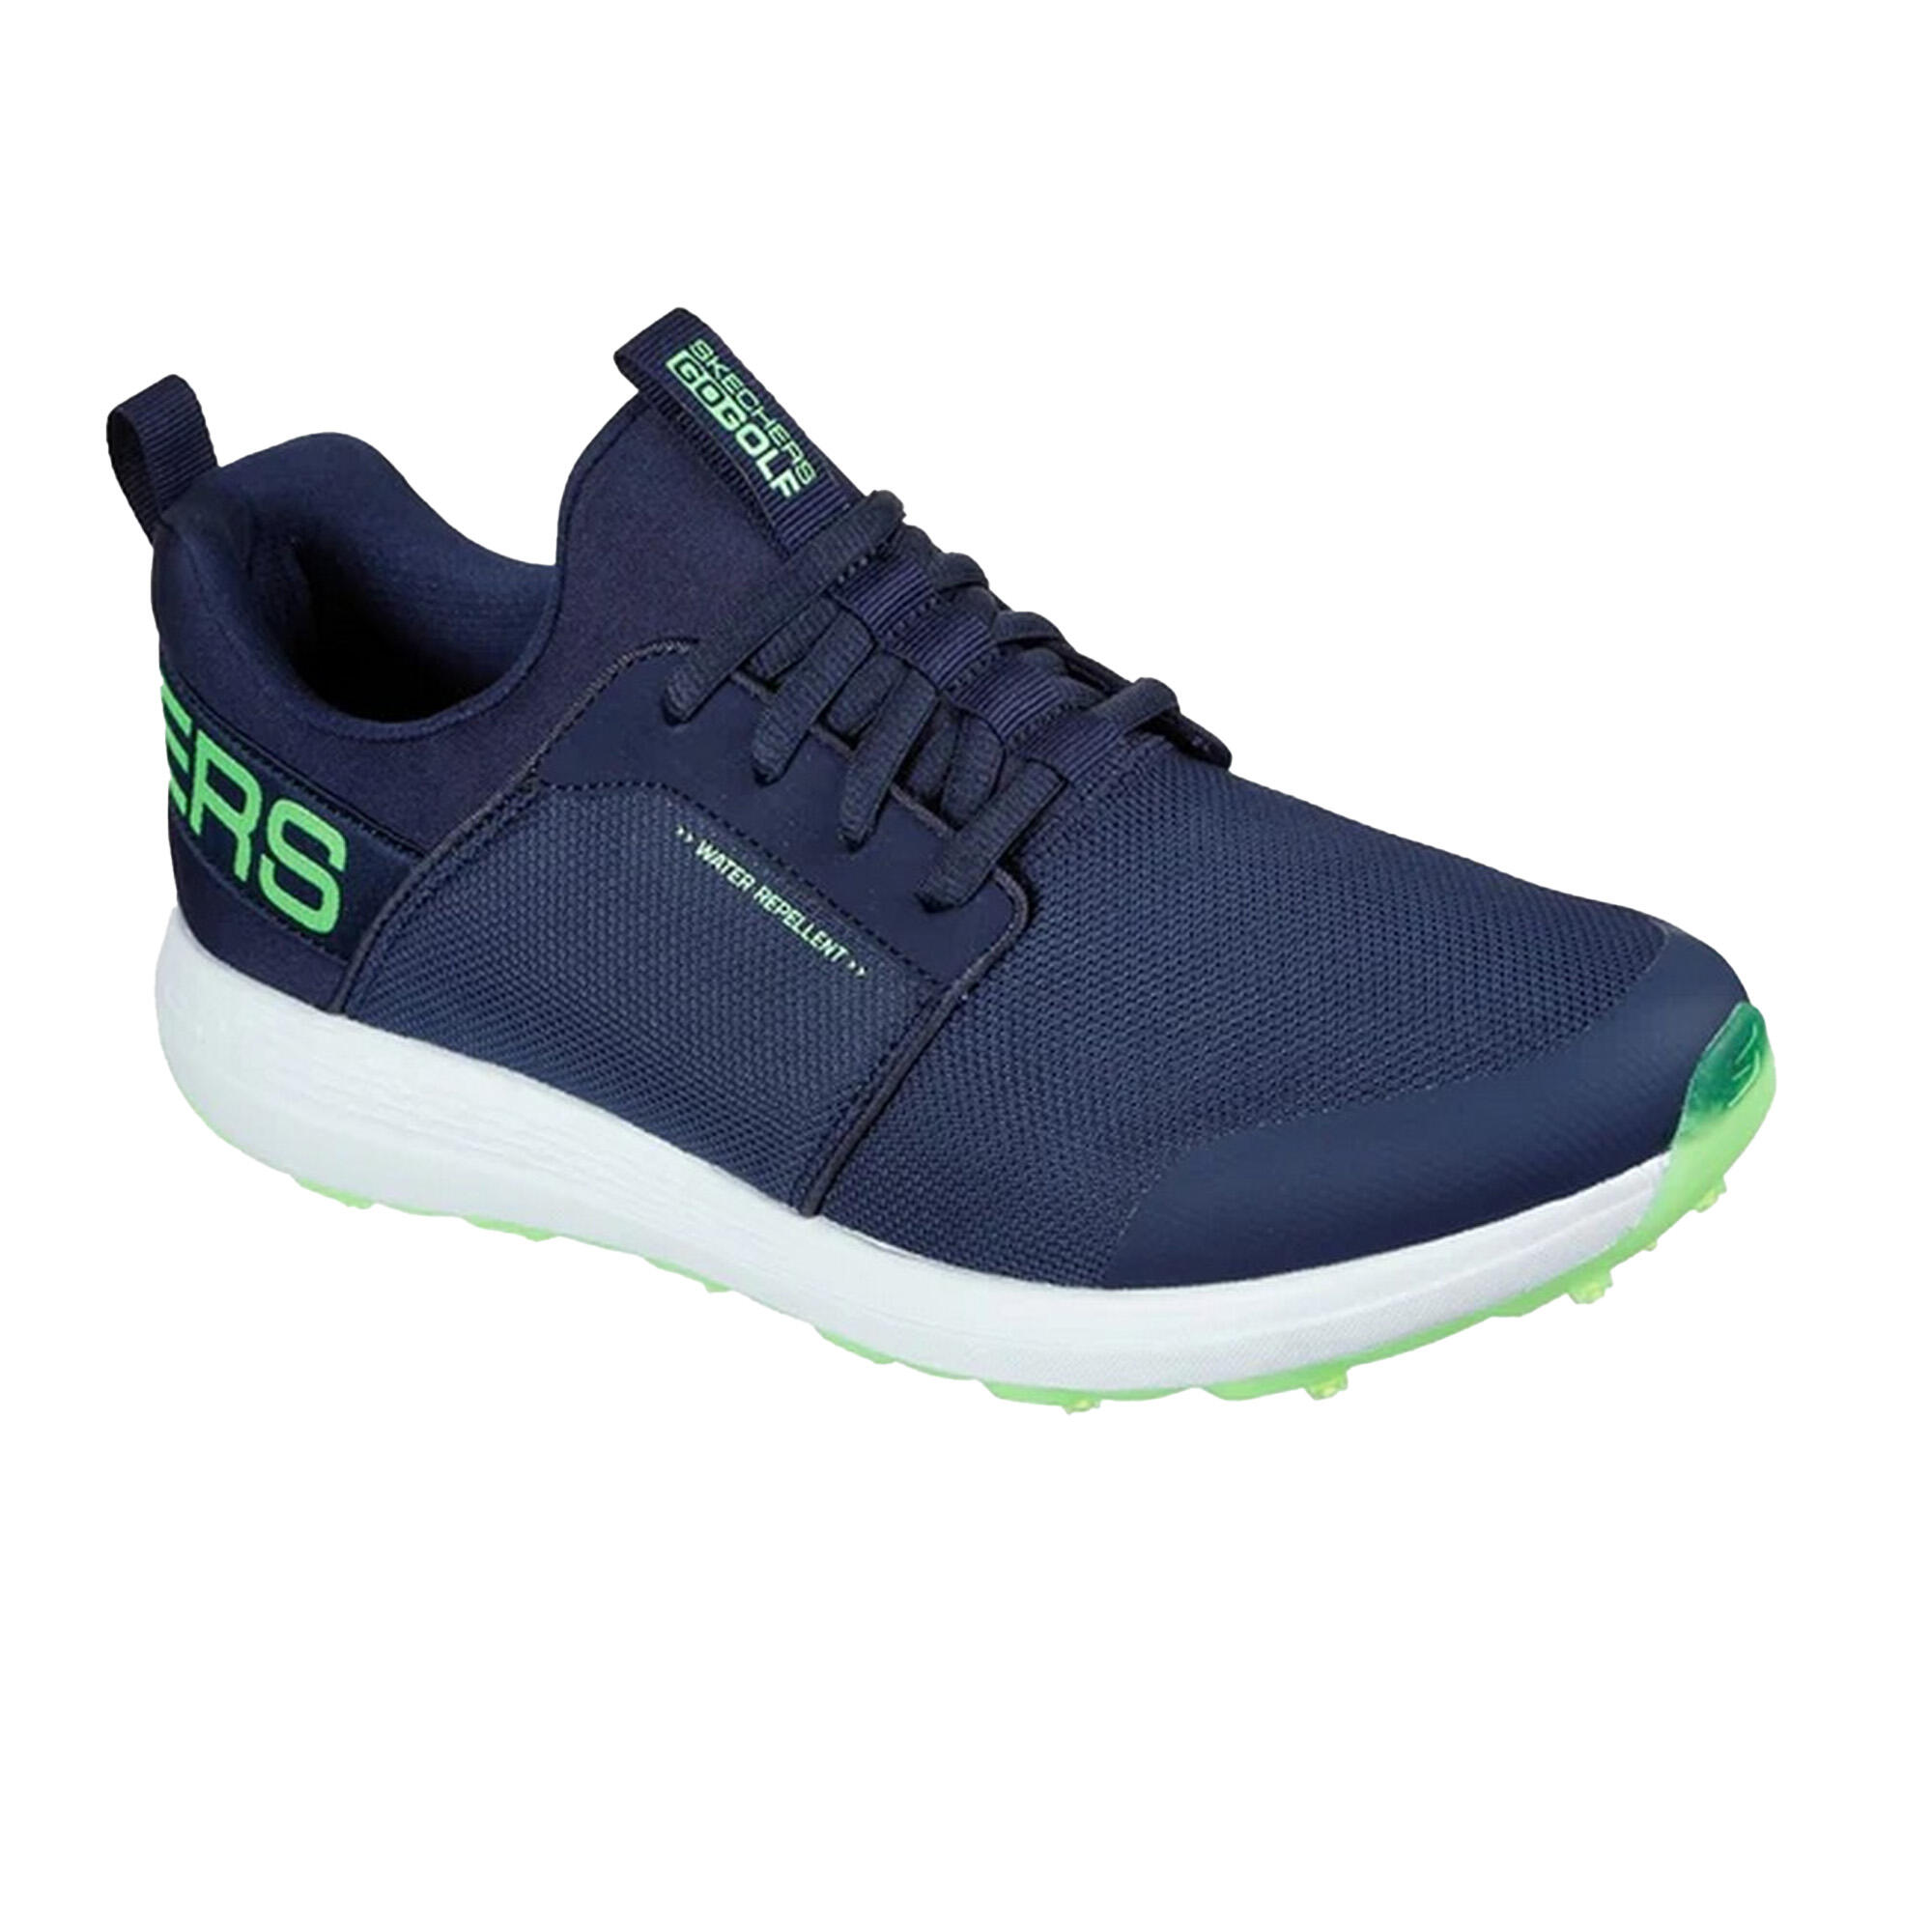 SKECHERS Mens Go Golf Max Sport Trainers (Navy/Lime)